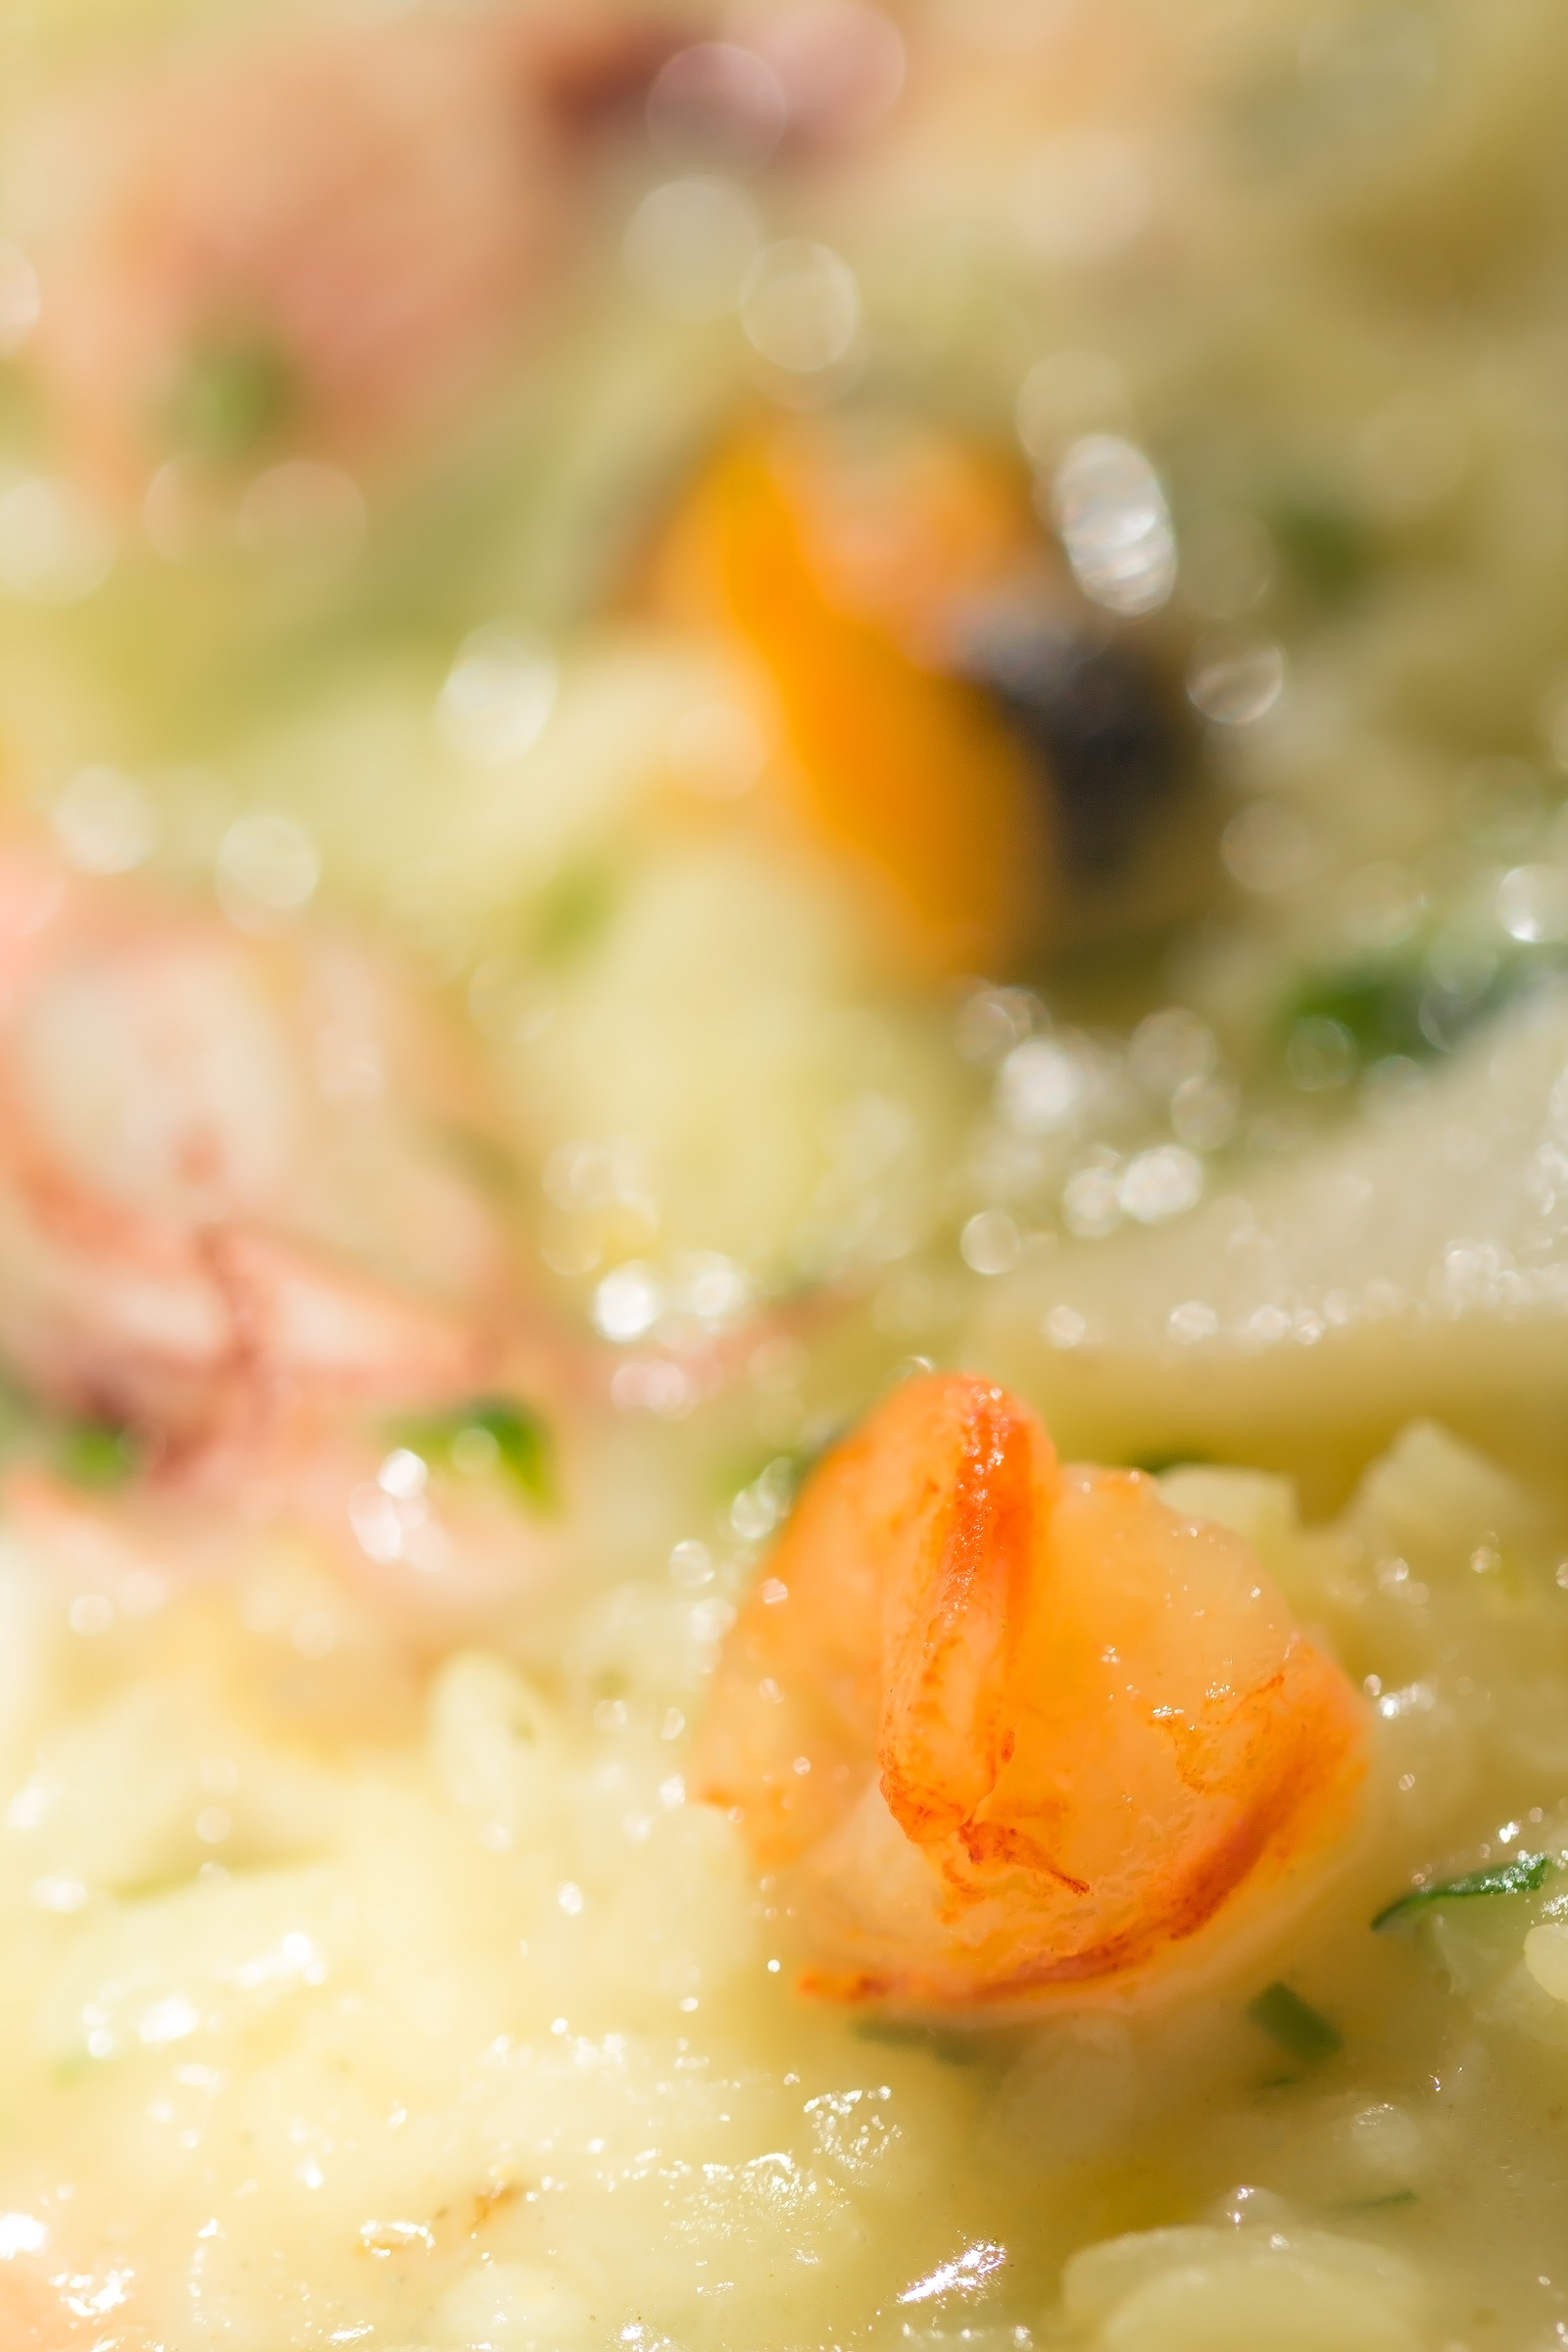 Seafood Risotto with fresh parsley, Parmesan cheese